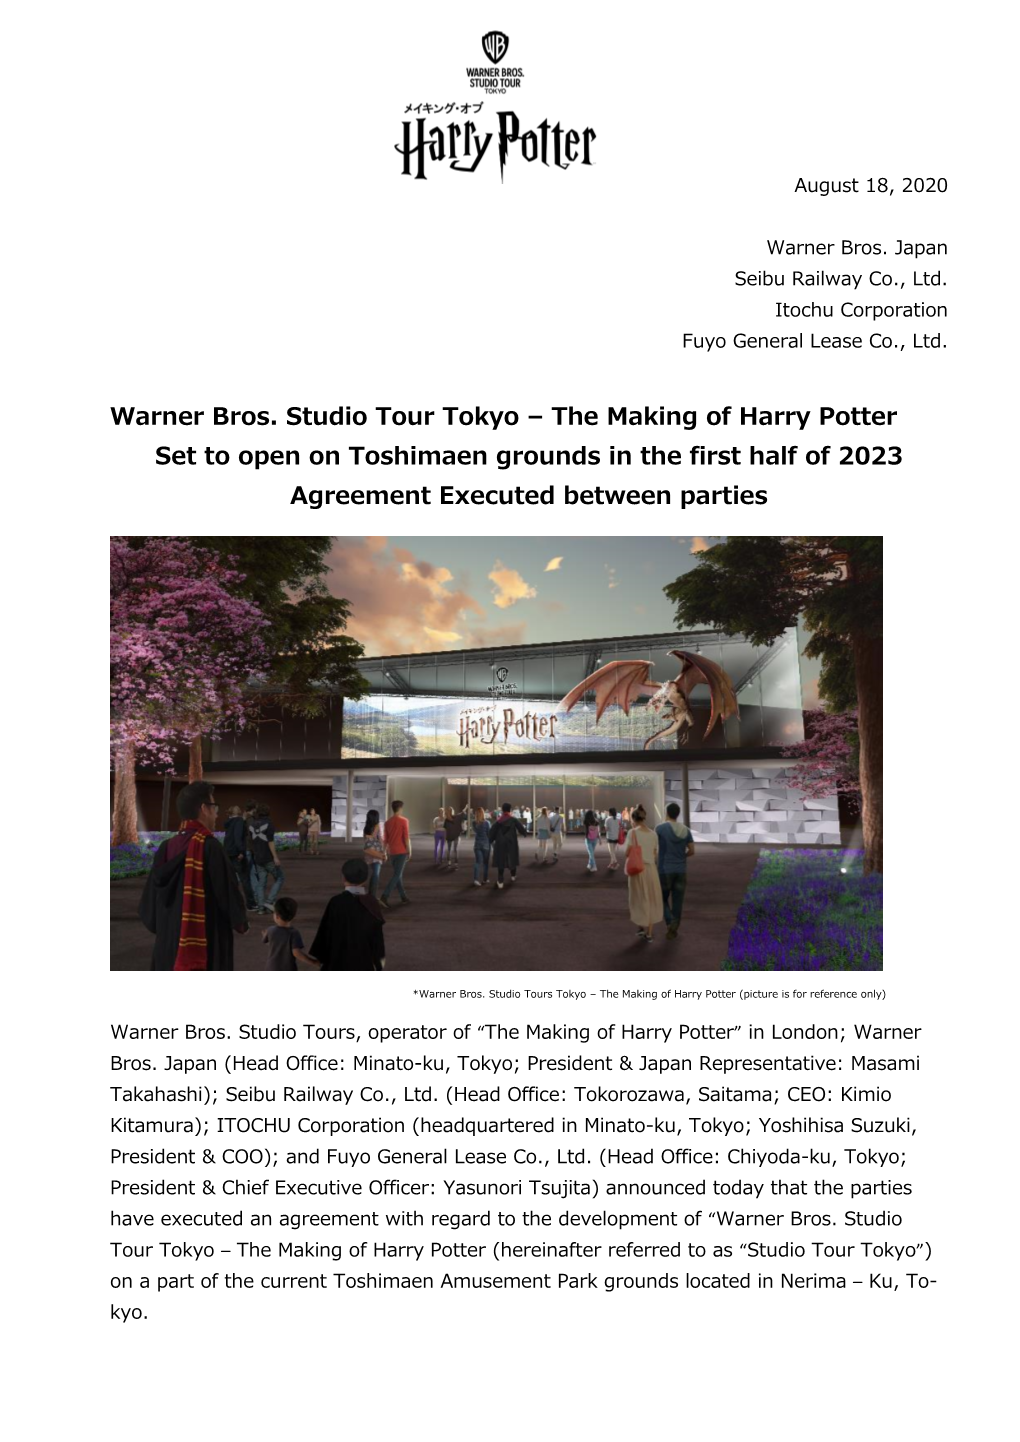 Warner Bros. Studio Tour Tokyo – the Making of Harry Potter Set to Open on Toshimaen Grounds in the First Half of 2023 Agreeme